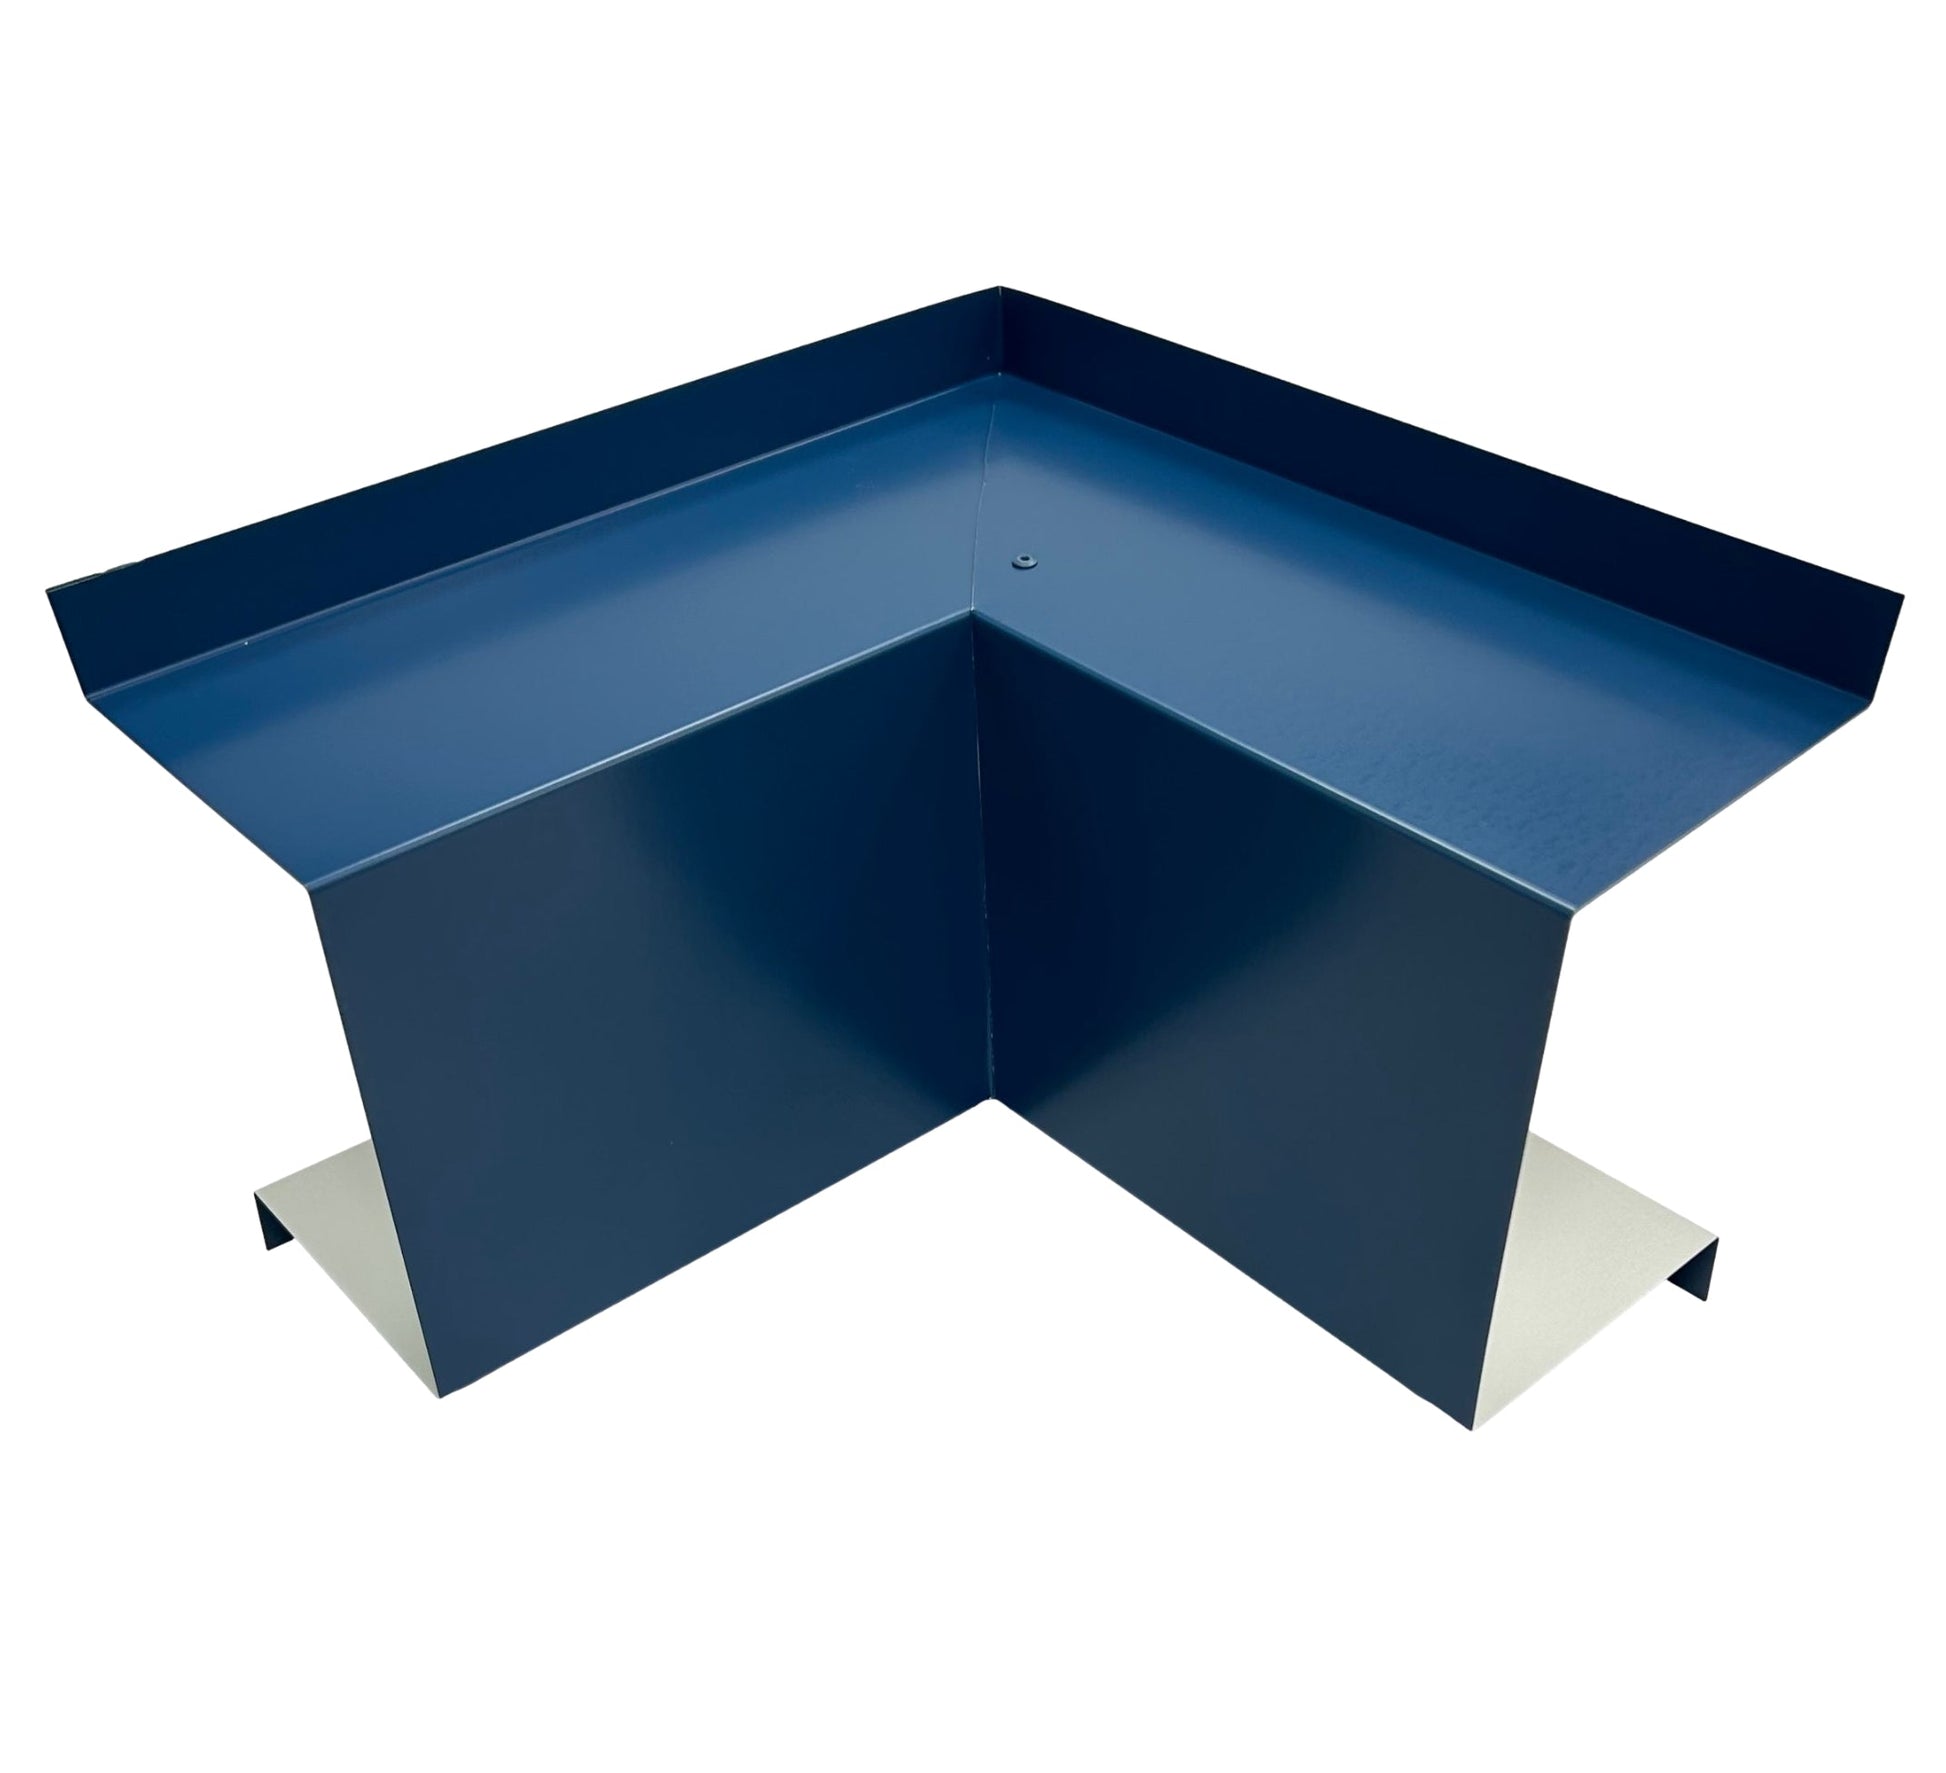 A Perma Cover Residential Series - Line Set Cover Inside Corner Elbows - Premium Quality is shaped like an inverted "V" to cover a roof valley. Painted dark blue, it has raised edges on both sides and a flat top with a simple, sleek design, making it versatile enough for various HVAC installations.